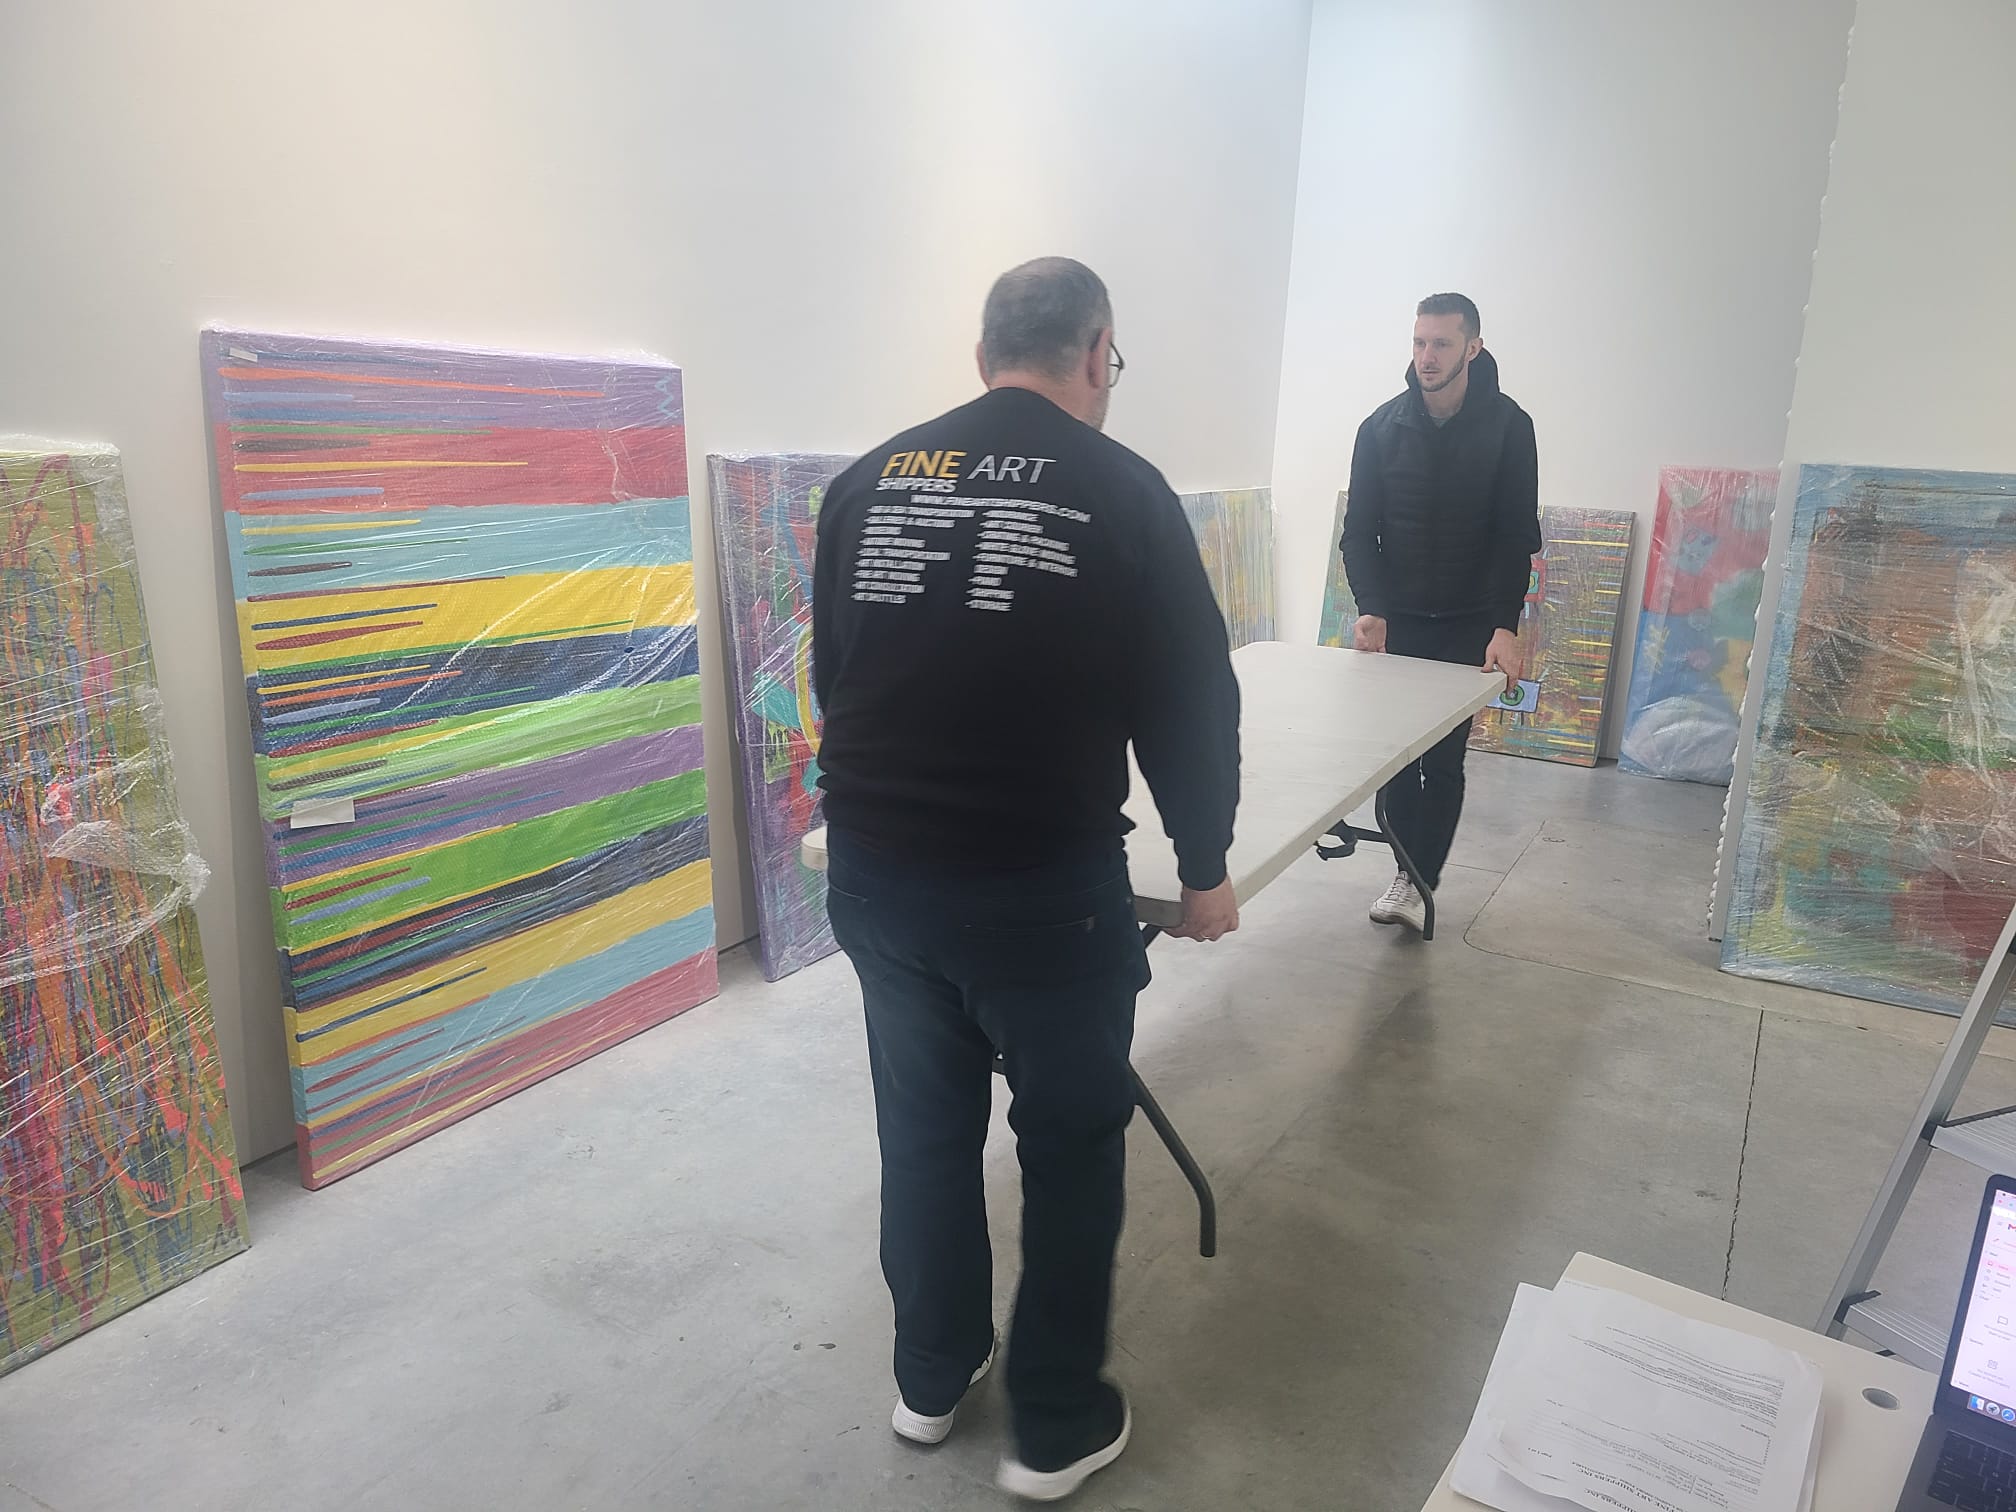 Fine Art Shippers Offers Art Packing & Installation Services in NYC